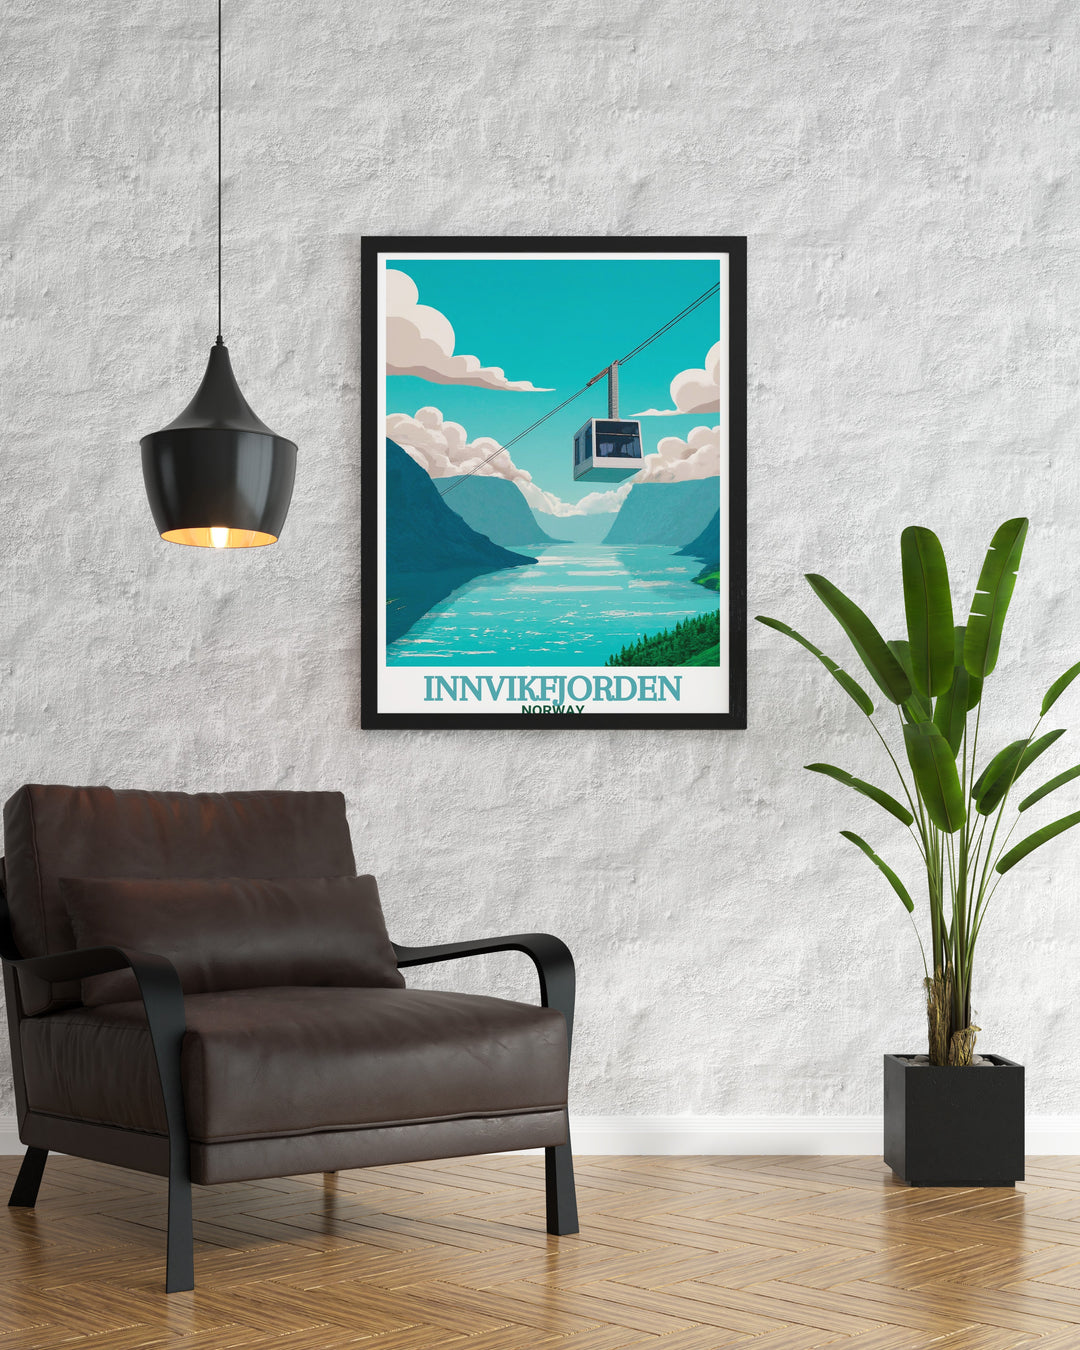 Beautiful Loen Skylift poster depicting the serene Norway landscape and fjord beauty perfect for enhancing any living space